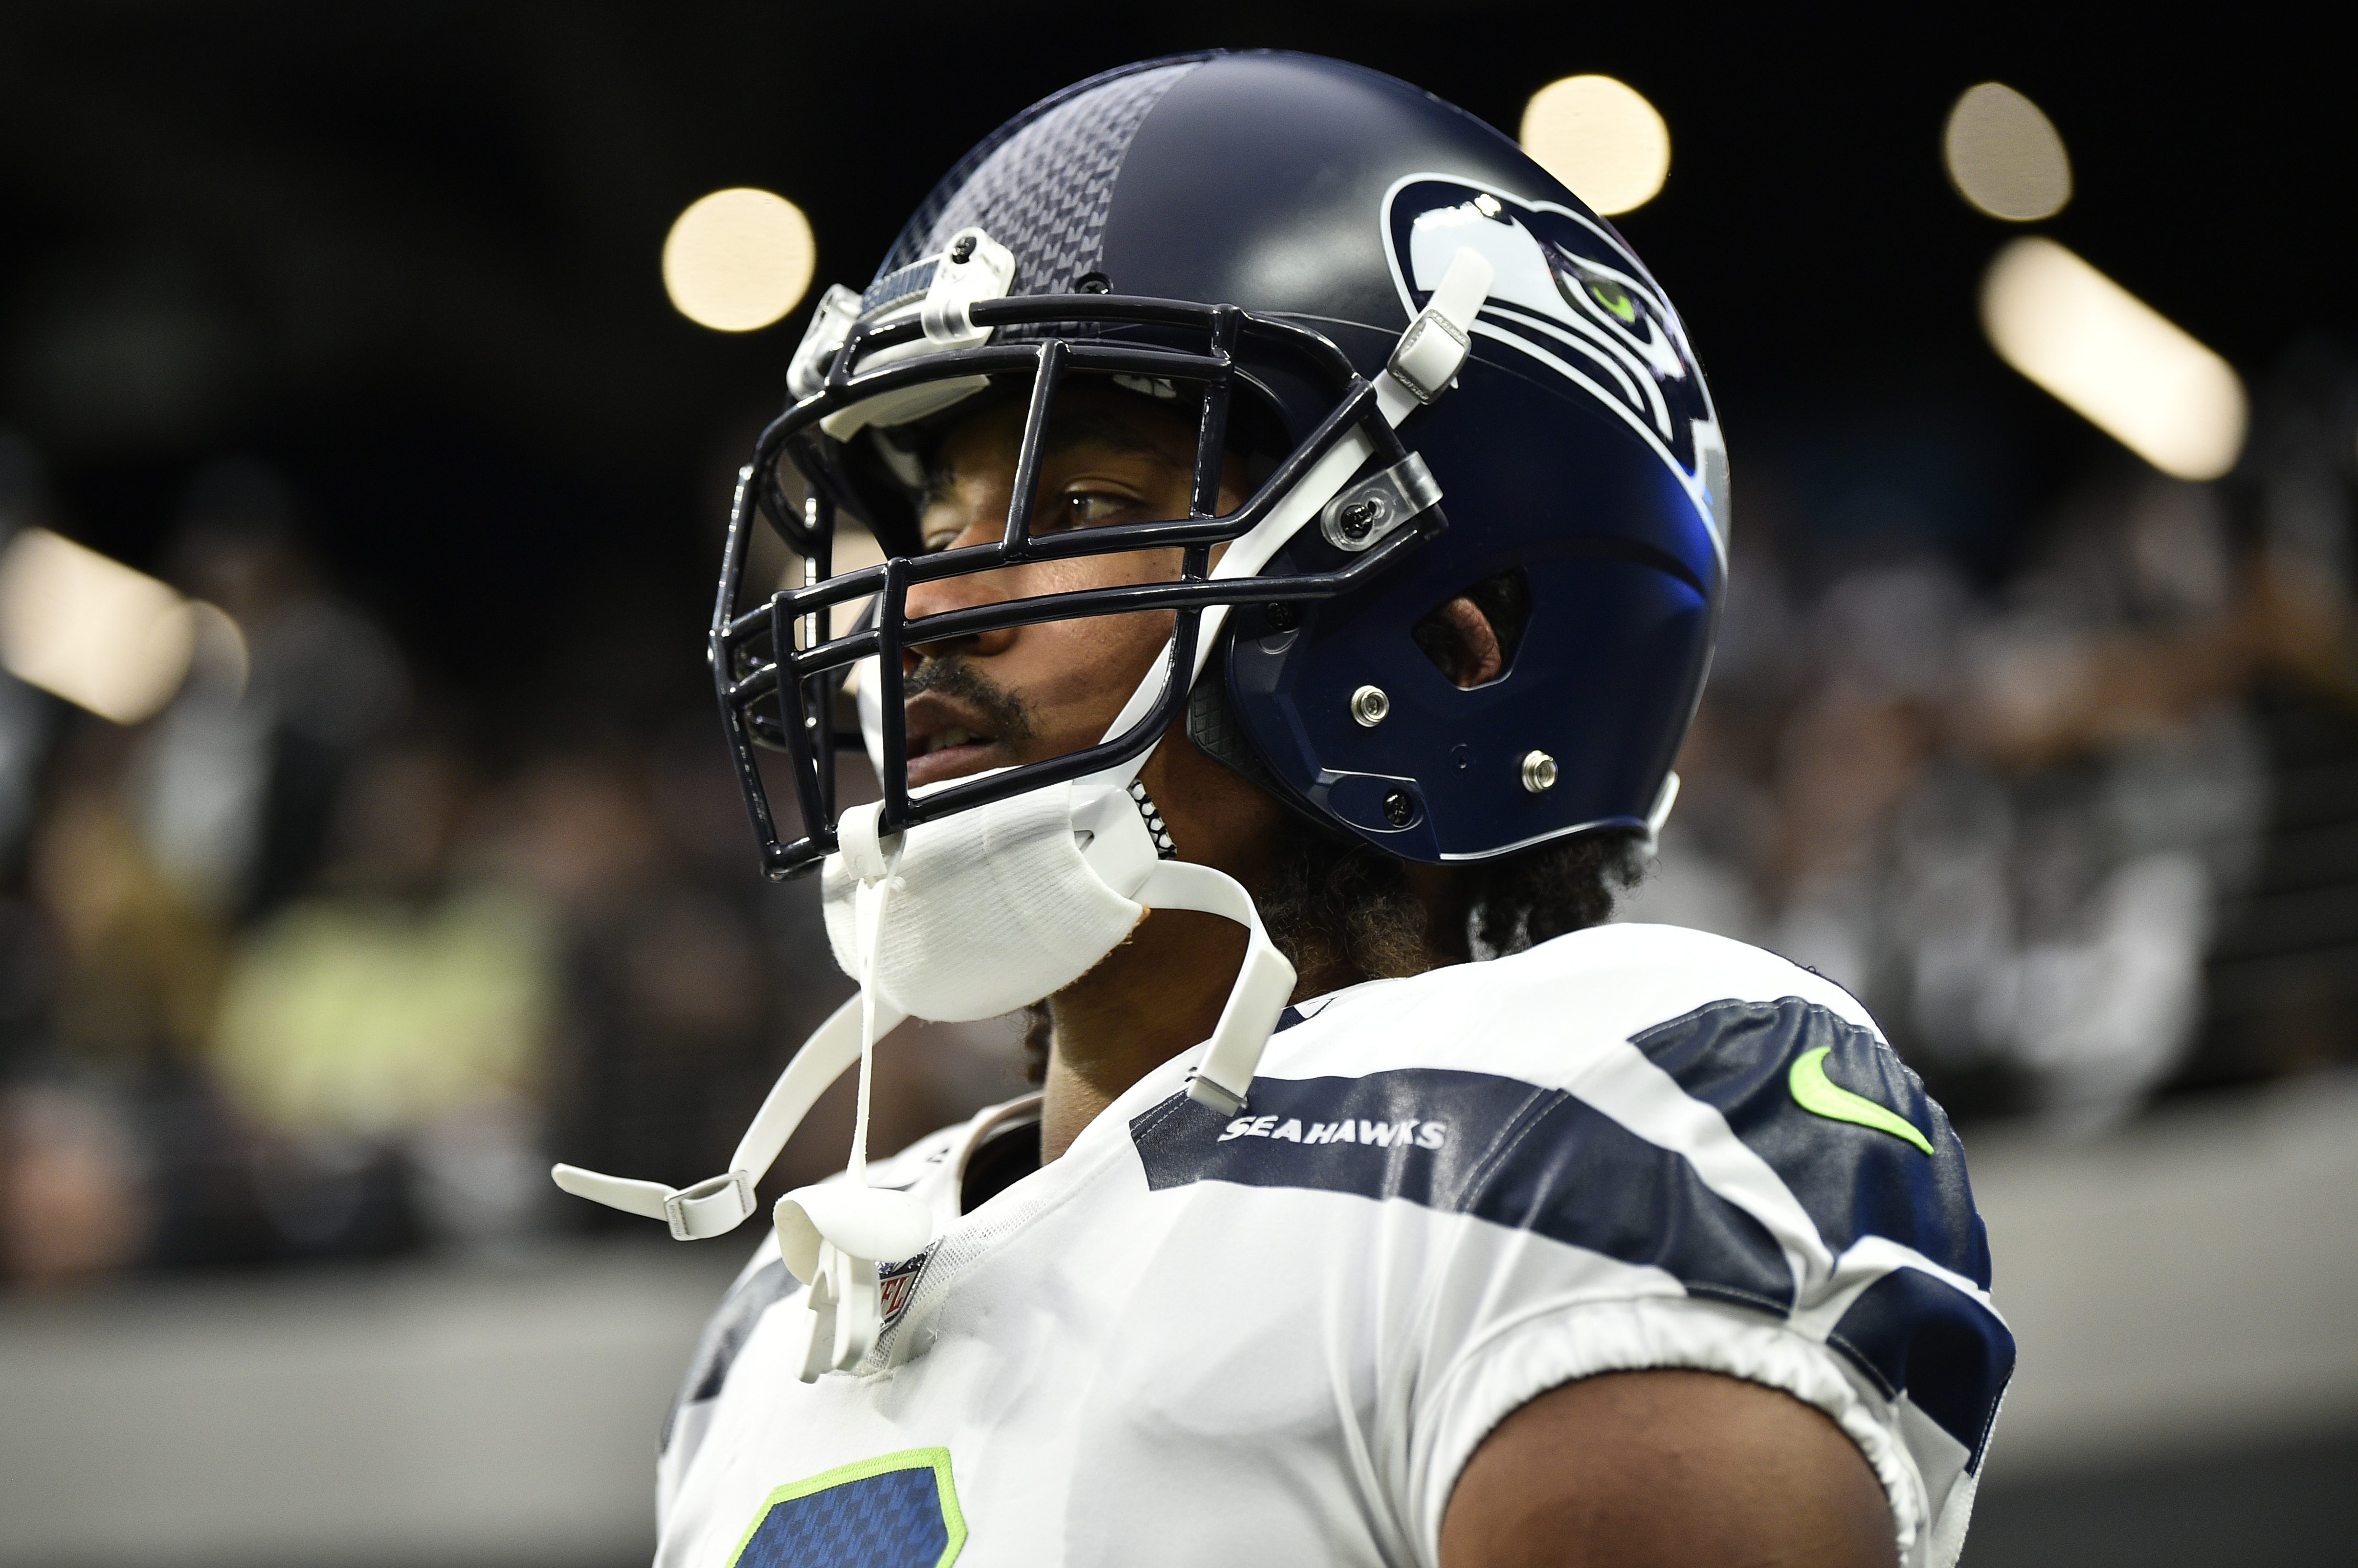 Former Seahawks CB Making Impact on Playoff Contender